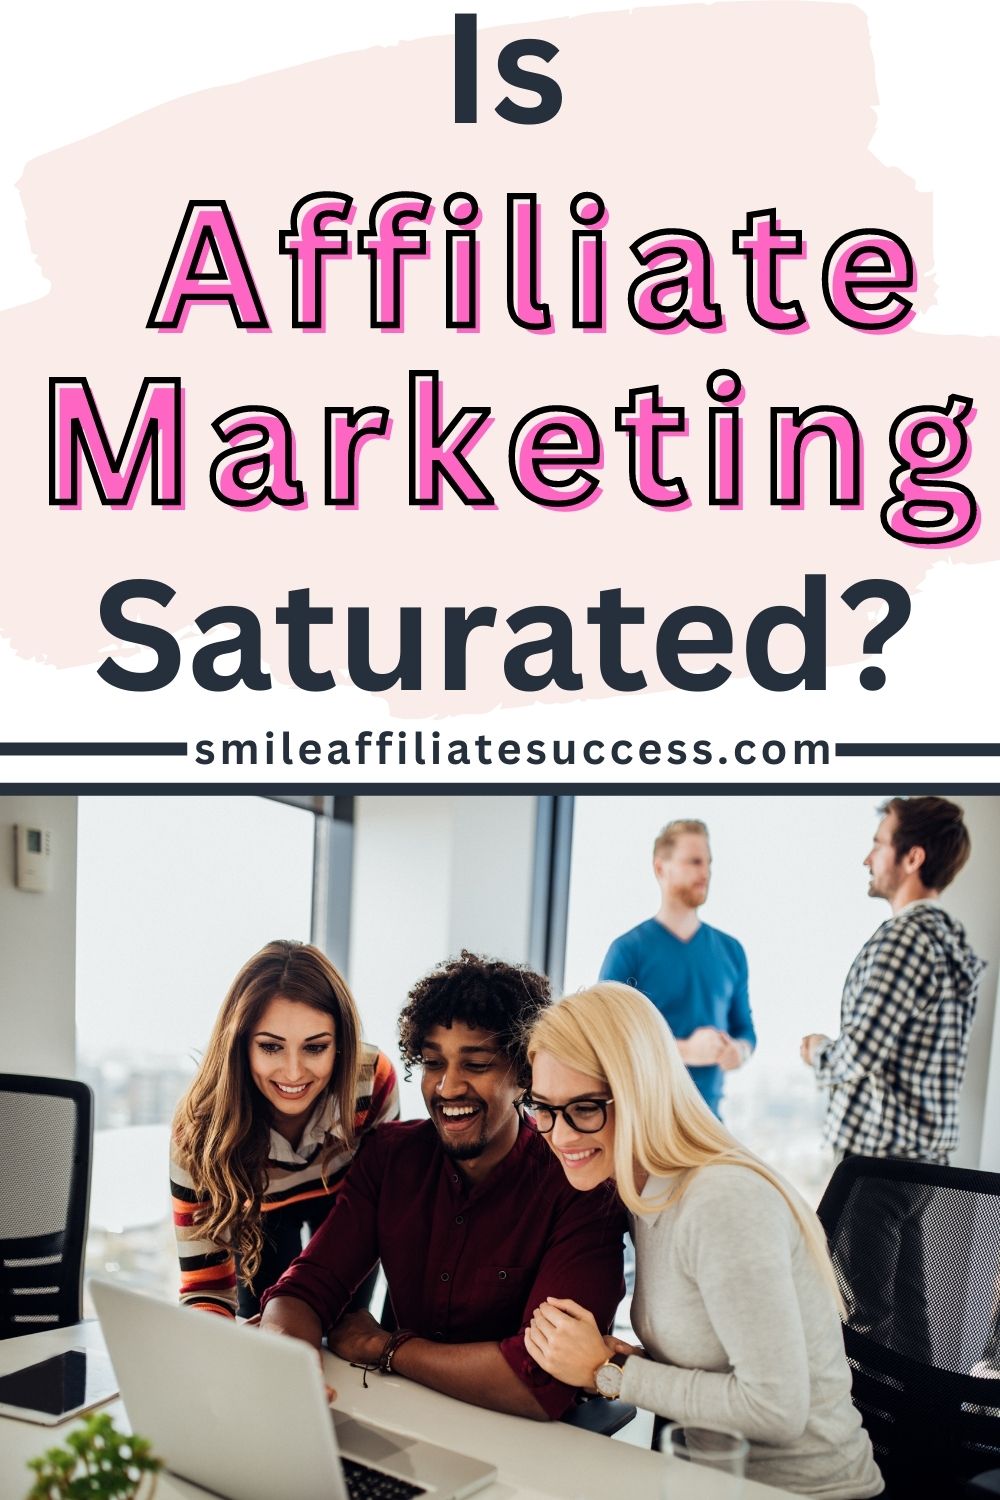 Is Affiliate Marketing Saturated?